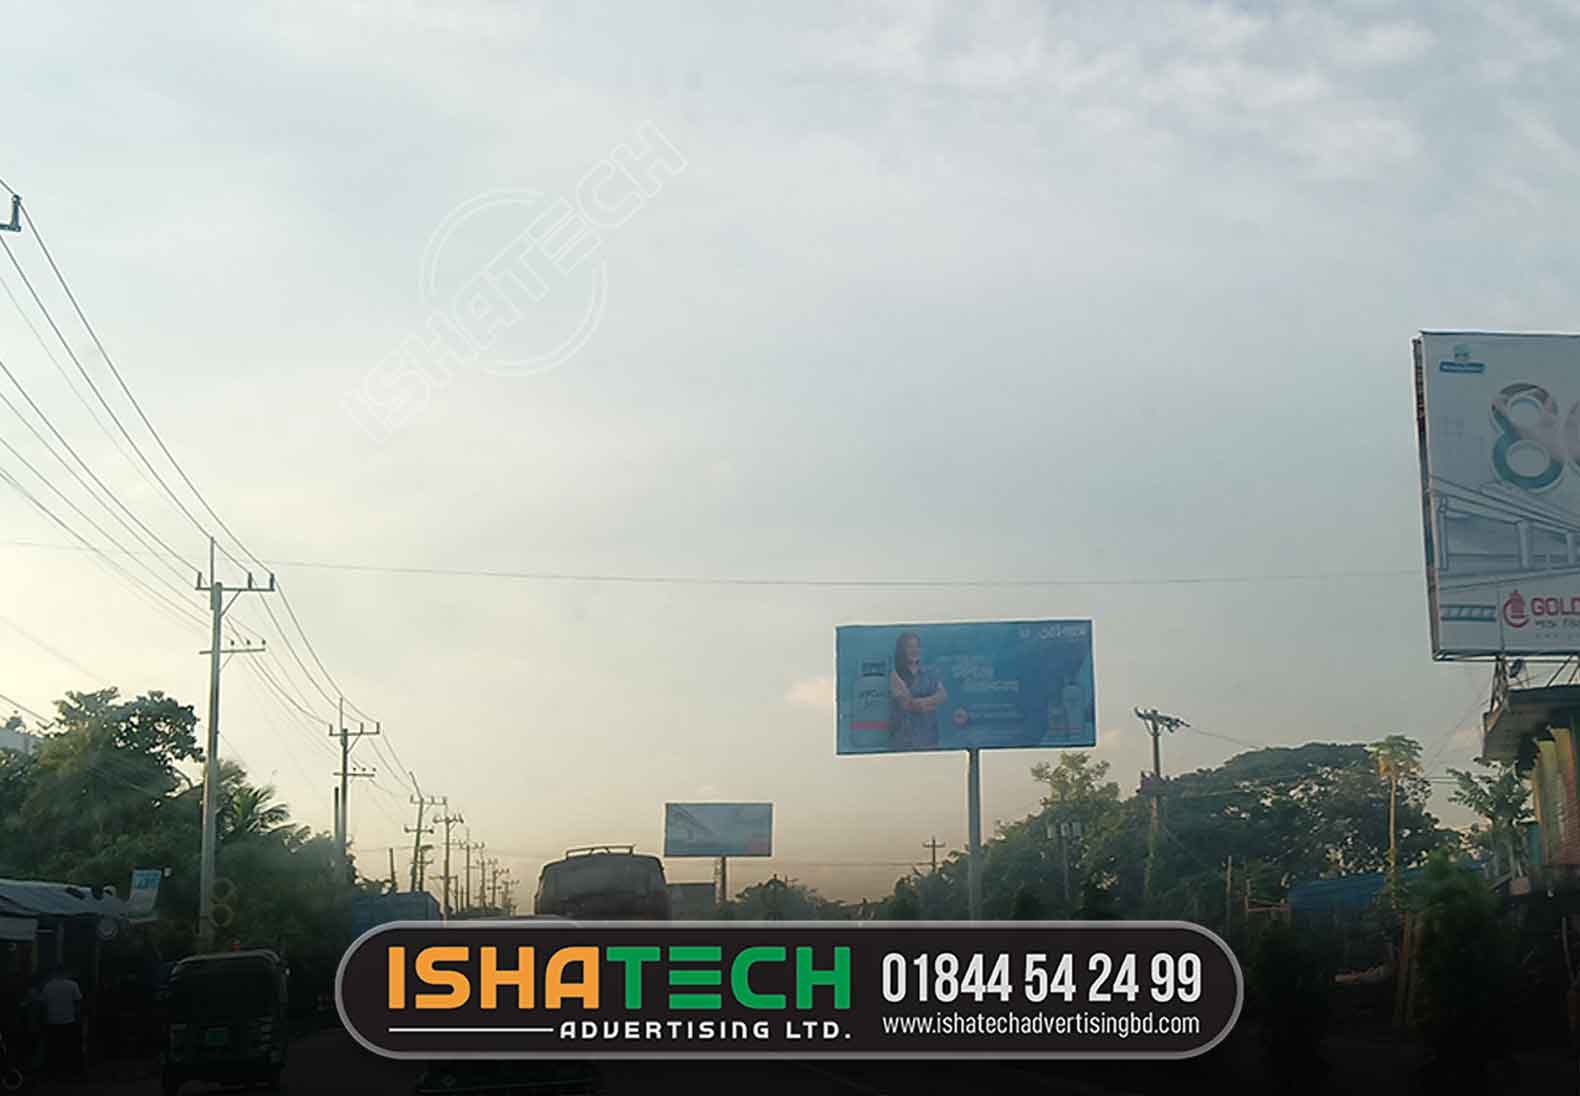 Our Advertising is offering best Hoardings solutions which can ease difficulty of outdoor promotion for businesses. The company gives the most recent components and an easy to understand environment that allows advertising brands to achieve their clients and ensure best service in a financially effective way. Advertising industry and promoters have become more creative and found extra approaches to make successful use of the billboard which now comes in numerous shapes and forms. So once you post your needs on any portal like hoarding advertising agencies in Bangladesh. Next Resolution Films hoarding advertising agencies in Bangladesh are a prominent competitor of this quality service across Bangladesh.